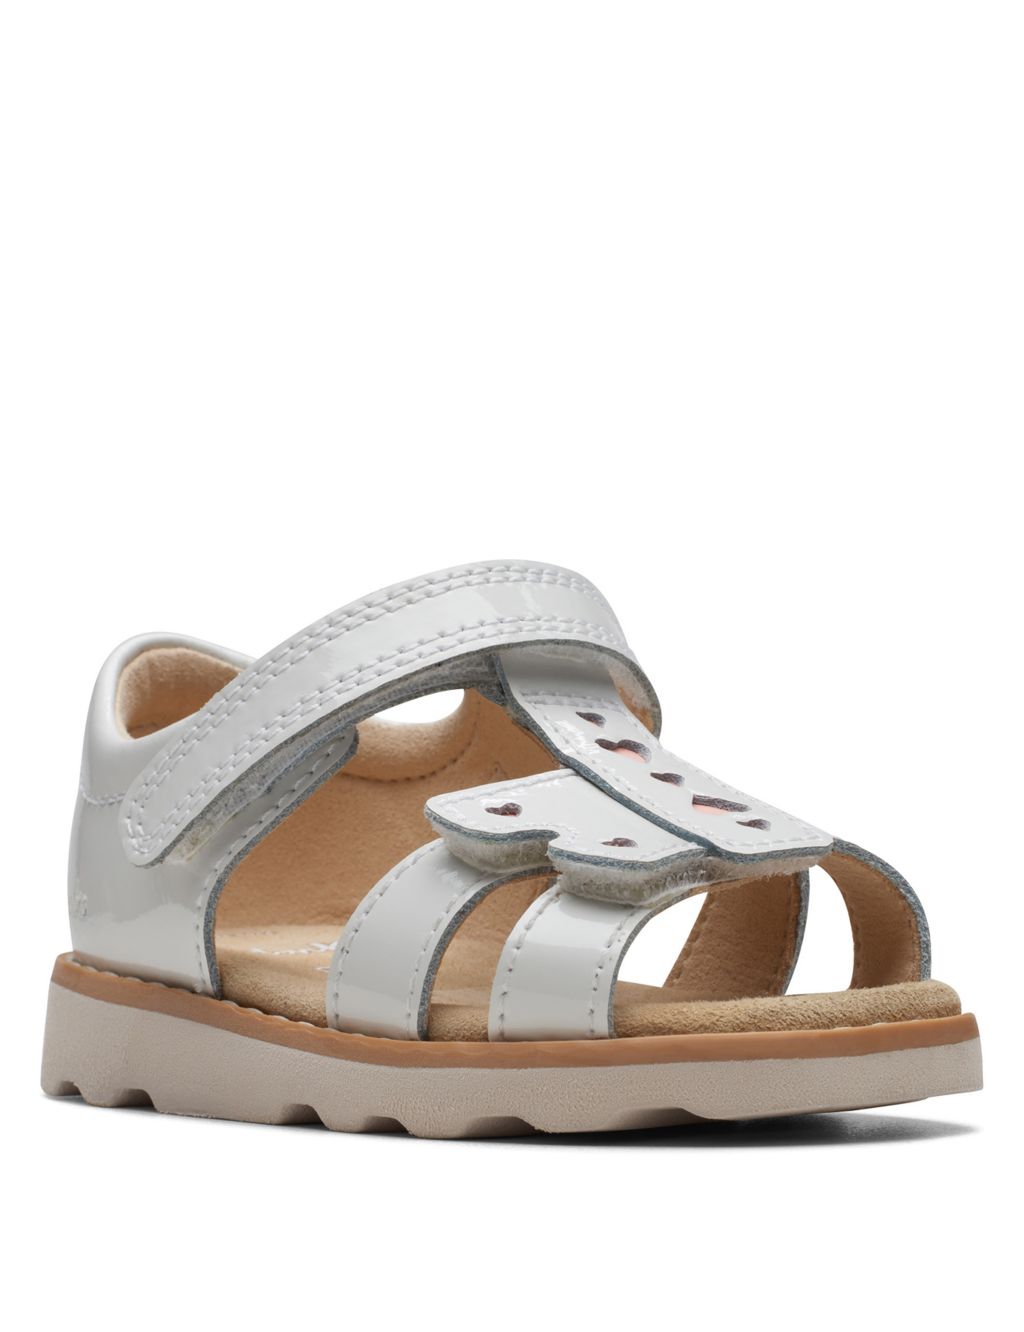 Kids' Leather Riptape Sandals (4 Small - 6½ Small) image 2